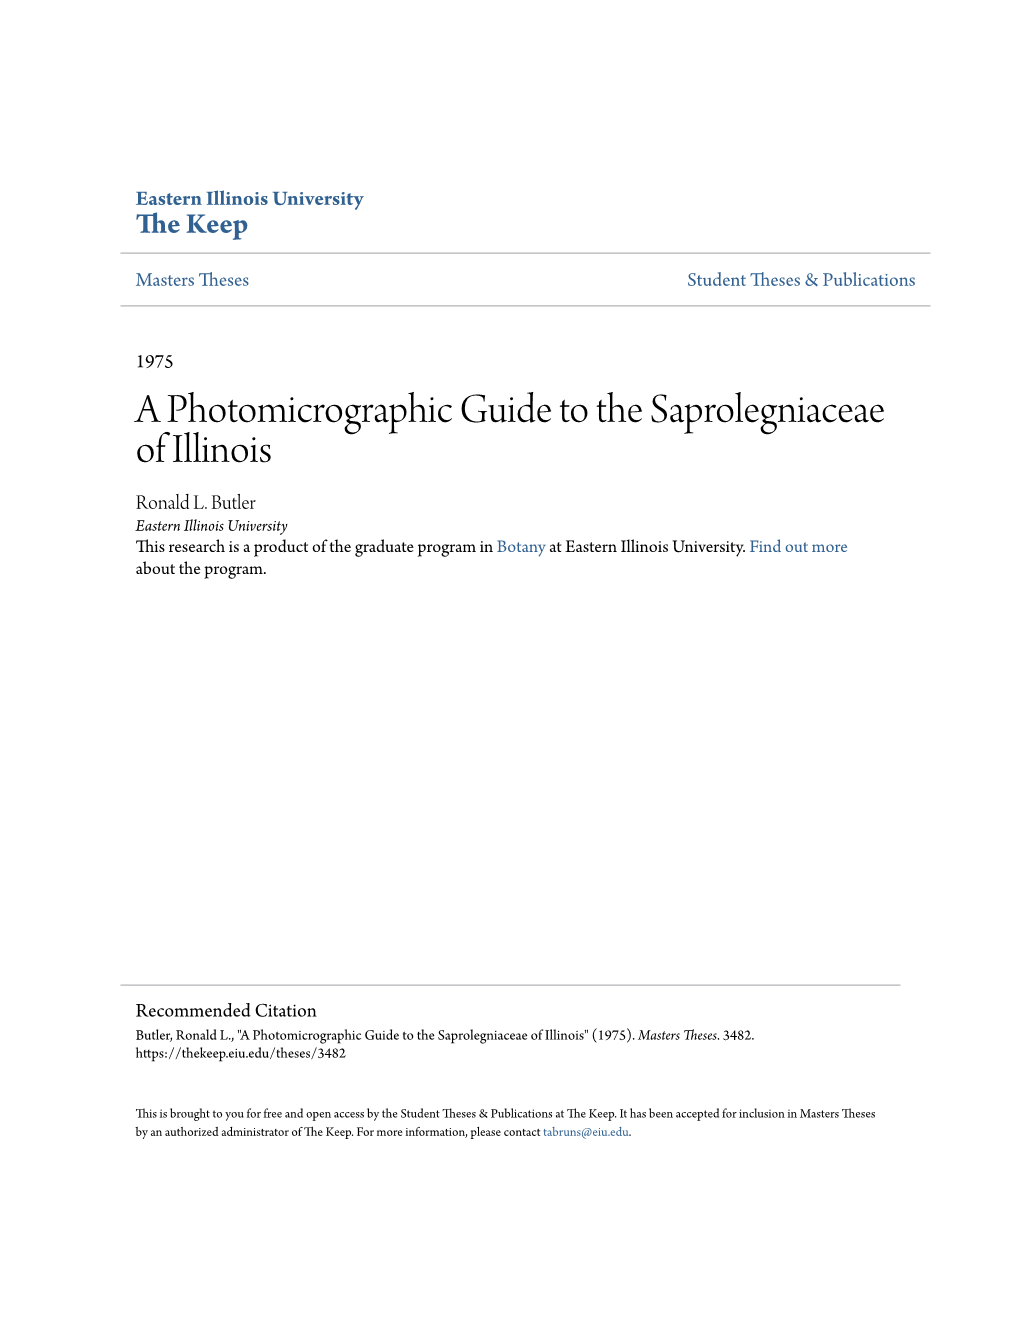 A Photomicrographic Guide to the Saprolegniaceae of Illinois Ronald L